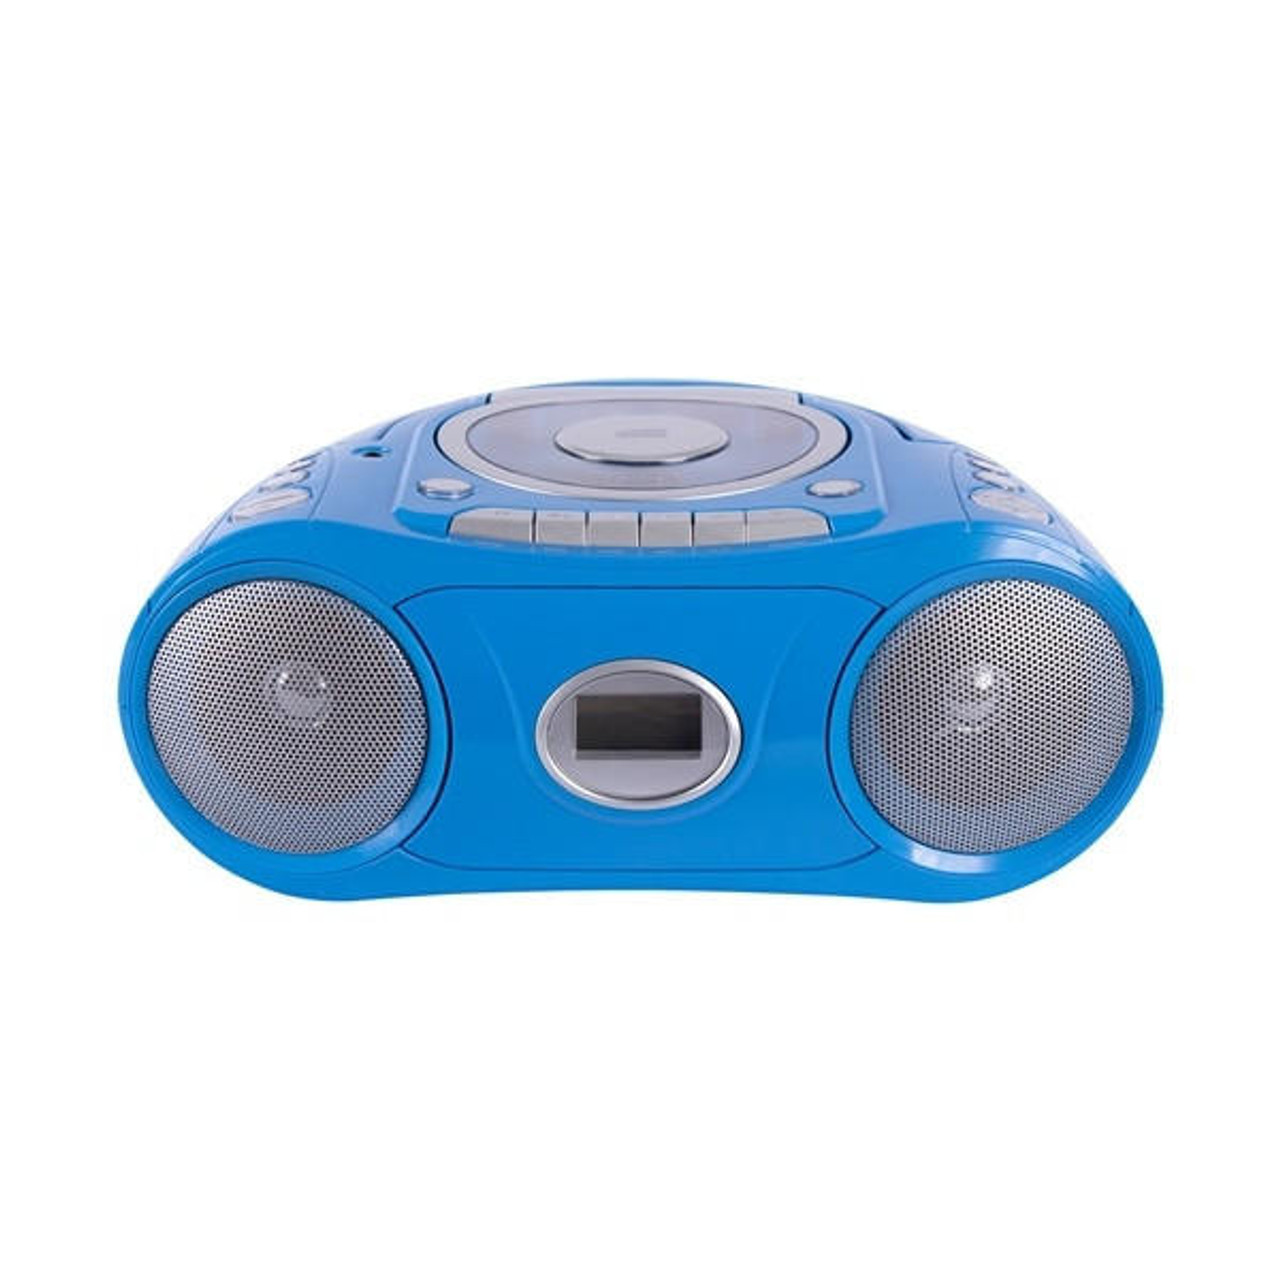 AudioStar Boombox AM/FM Radio, CD, MP3, and Cassette Player with Tape to  MP3 Converter